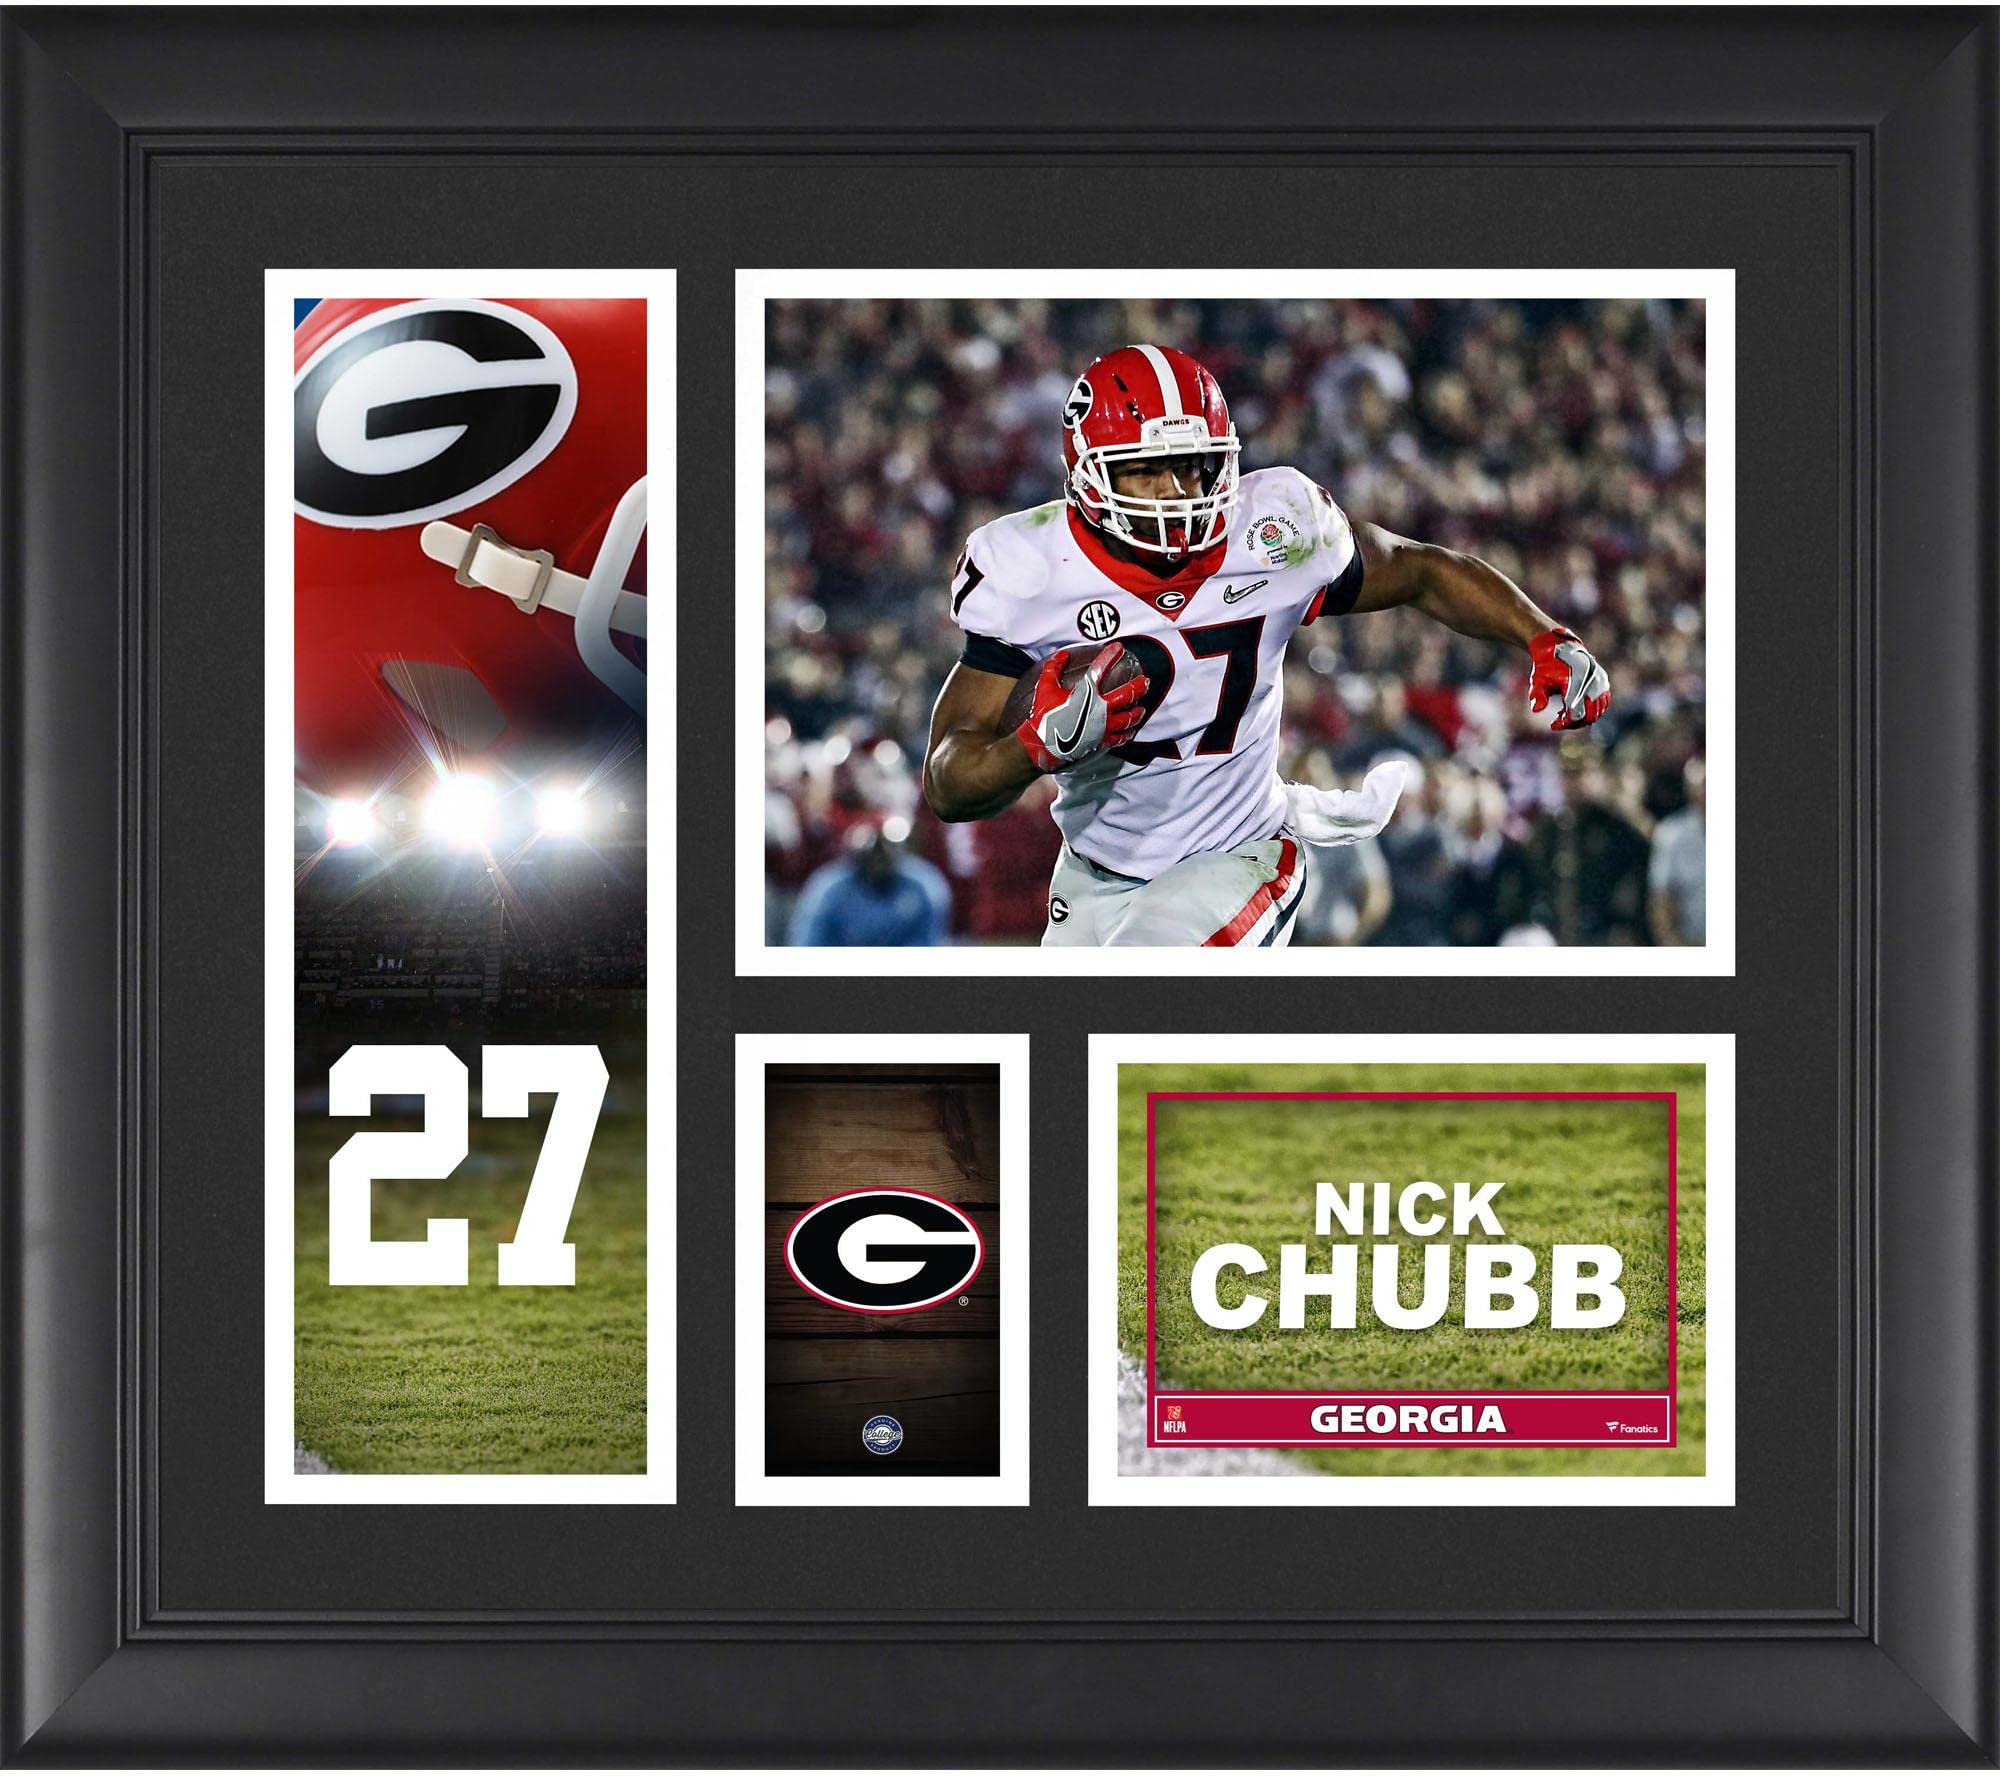 Nick Chubb Georgia Bulldogs Framed 15" x 17" Player Collage - College Player Plaques and Collages